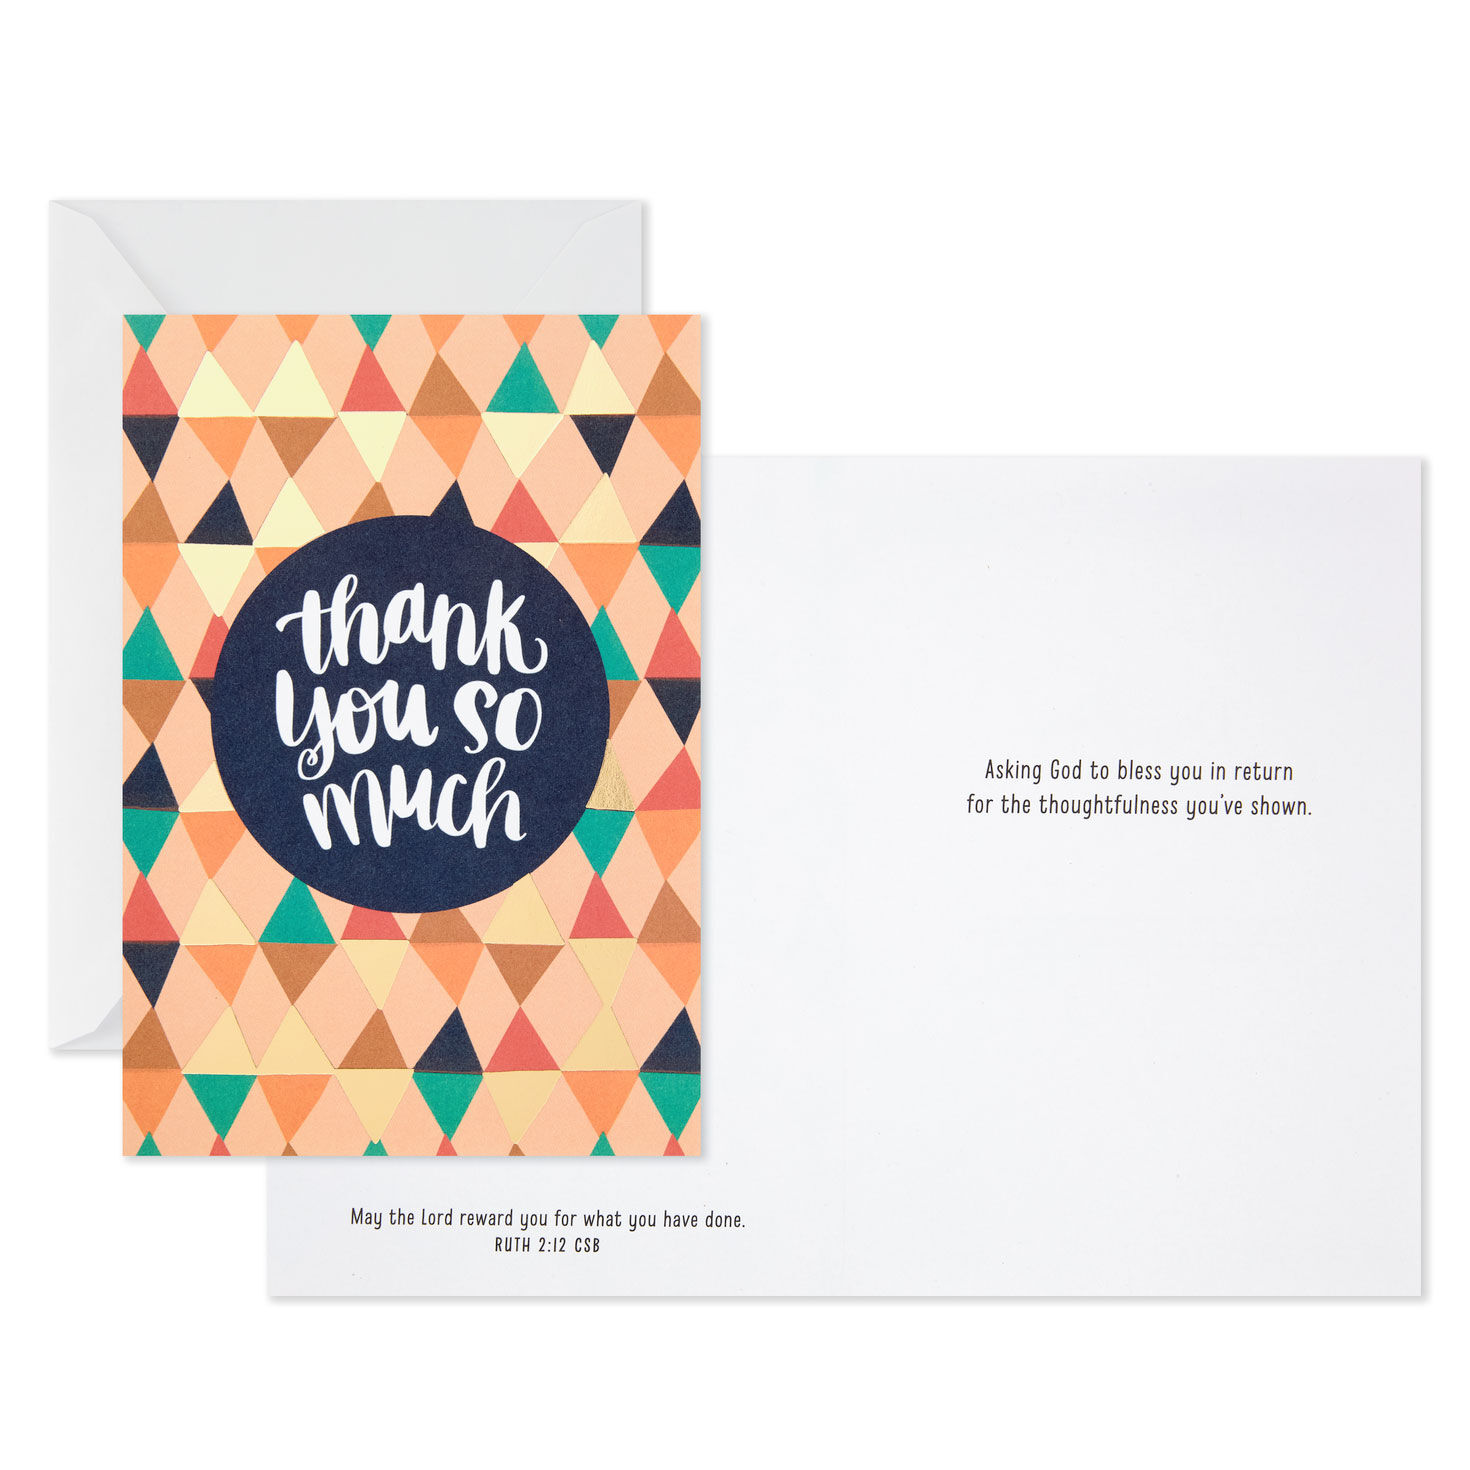 Asking God to Bless You Religious Thank-You Cards, Pack of 10 for only USD 7.99 | Hallmark